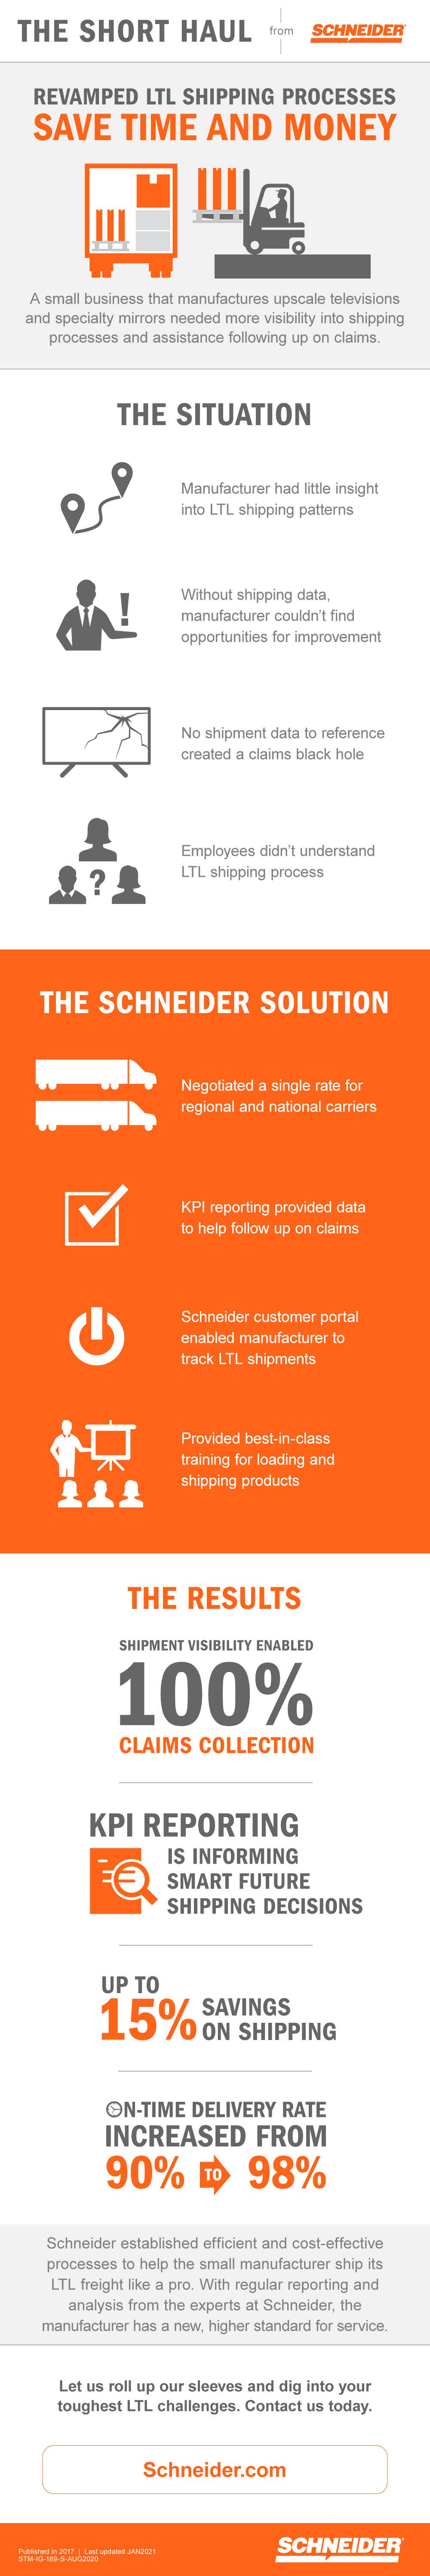 infographic file which steps through how a revamped LTL (Less Than Truckload) shipping process saves time and money